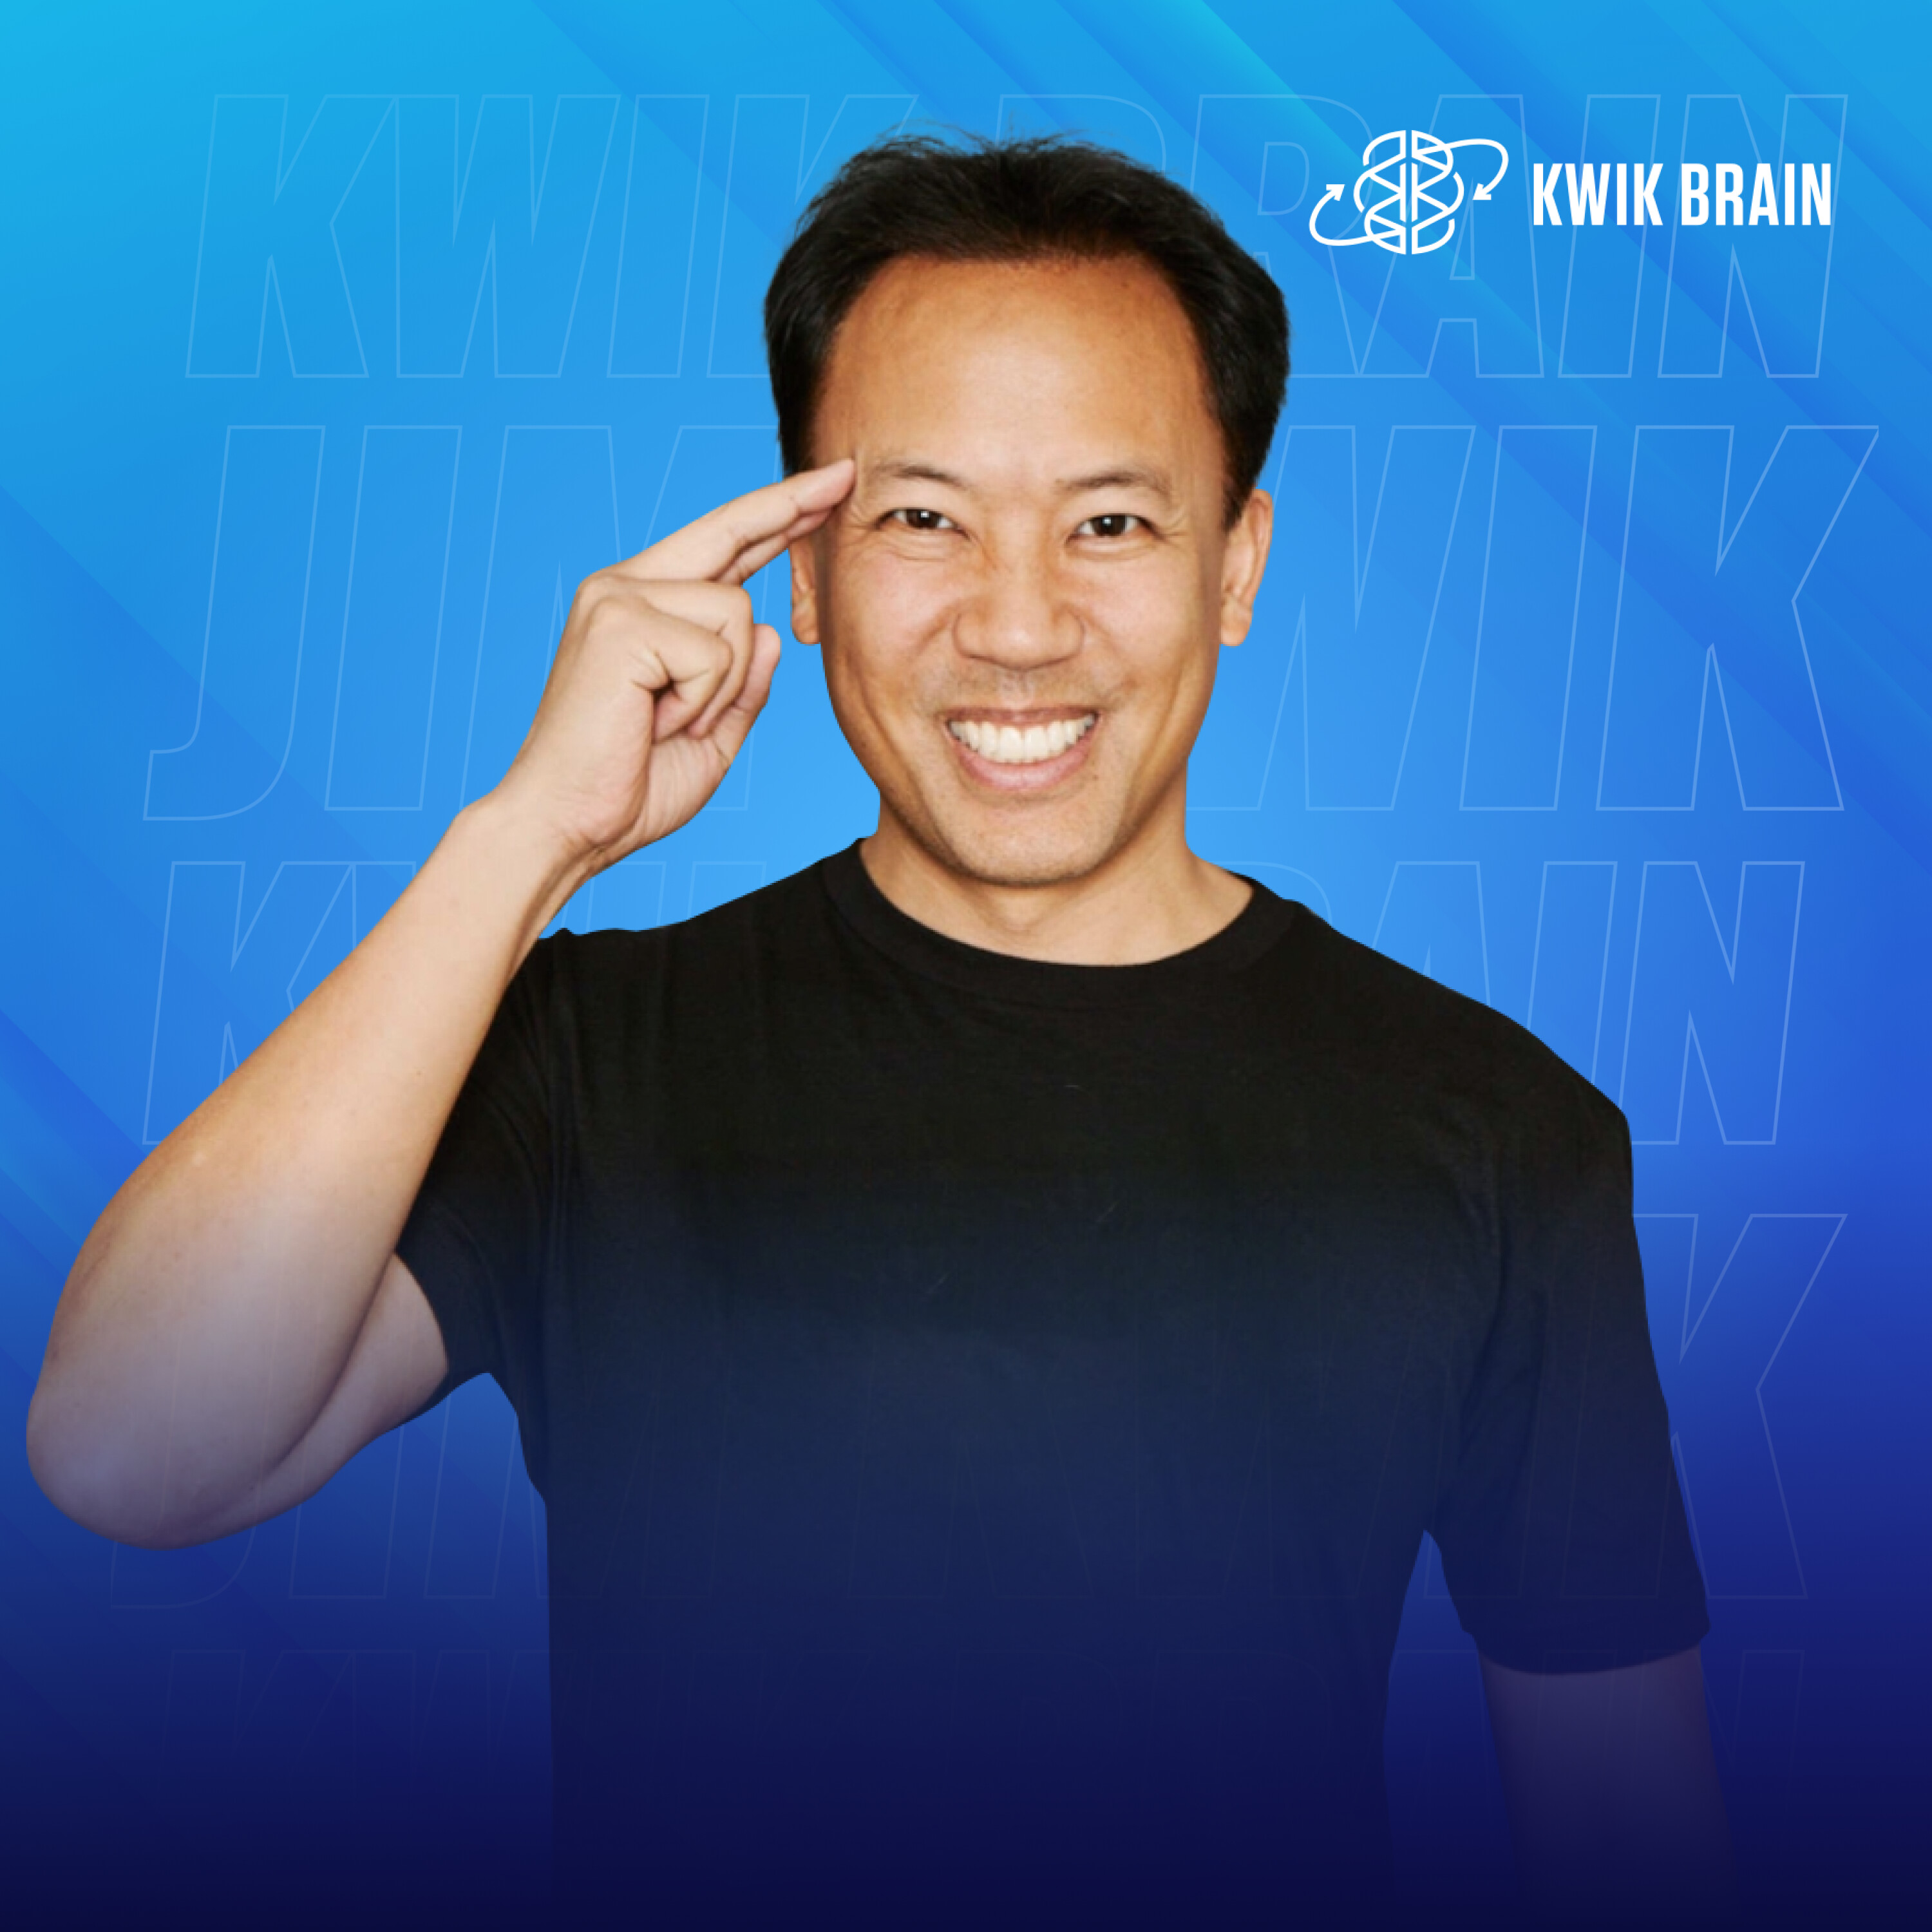 How to Heal When Life Breaks You with Jim Kwik